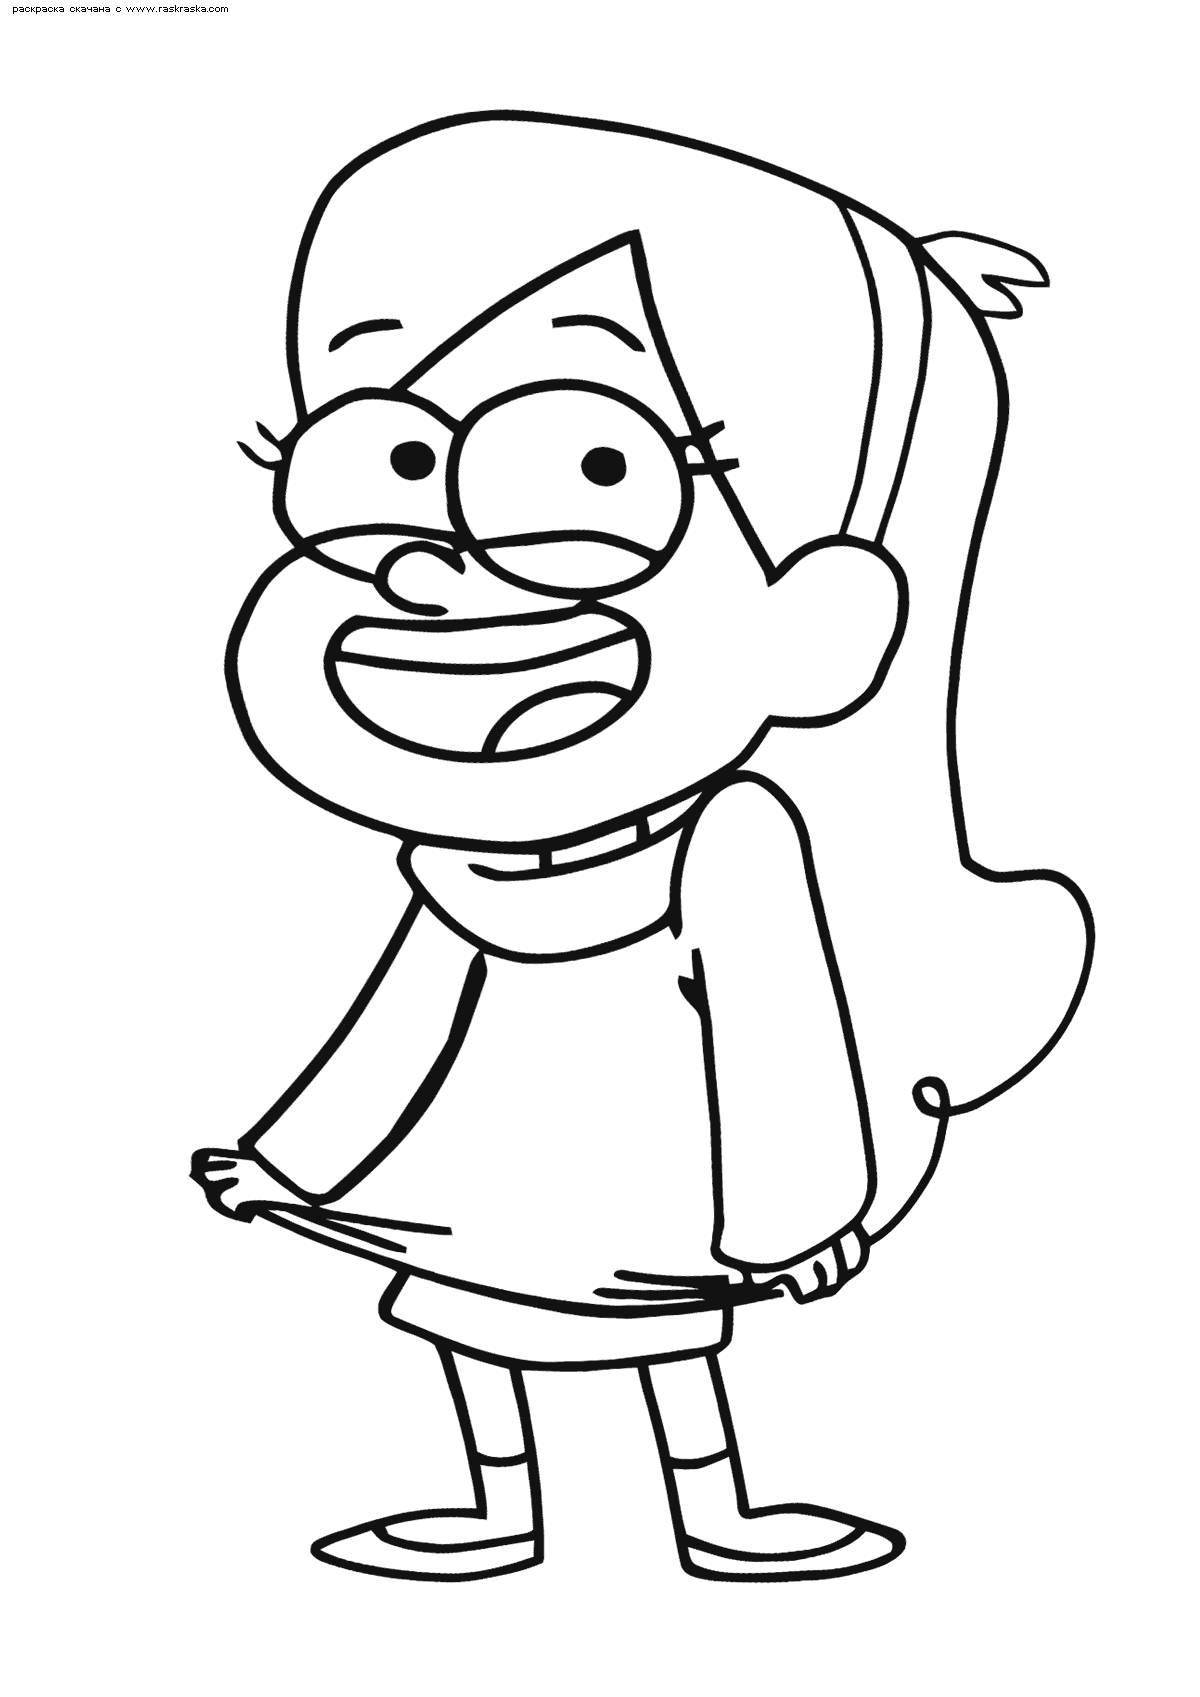 Pretty mabel from gravity falls